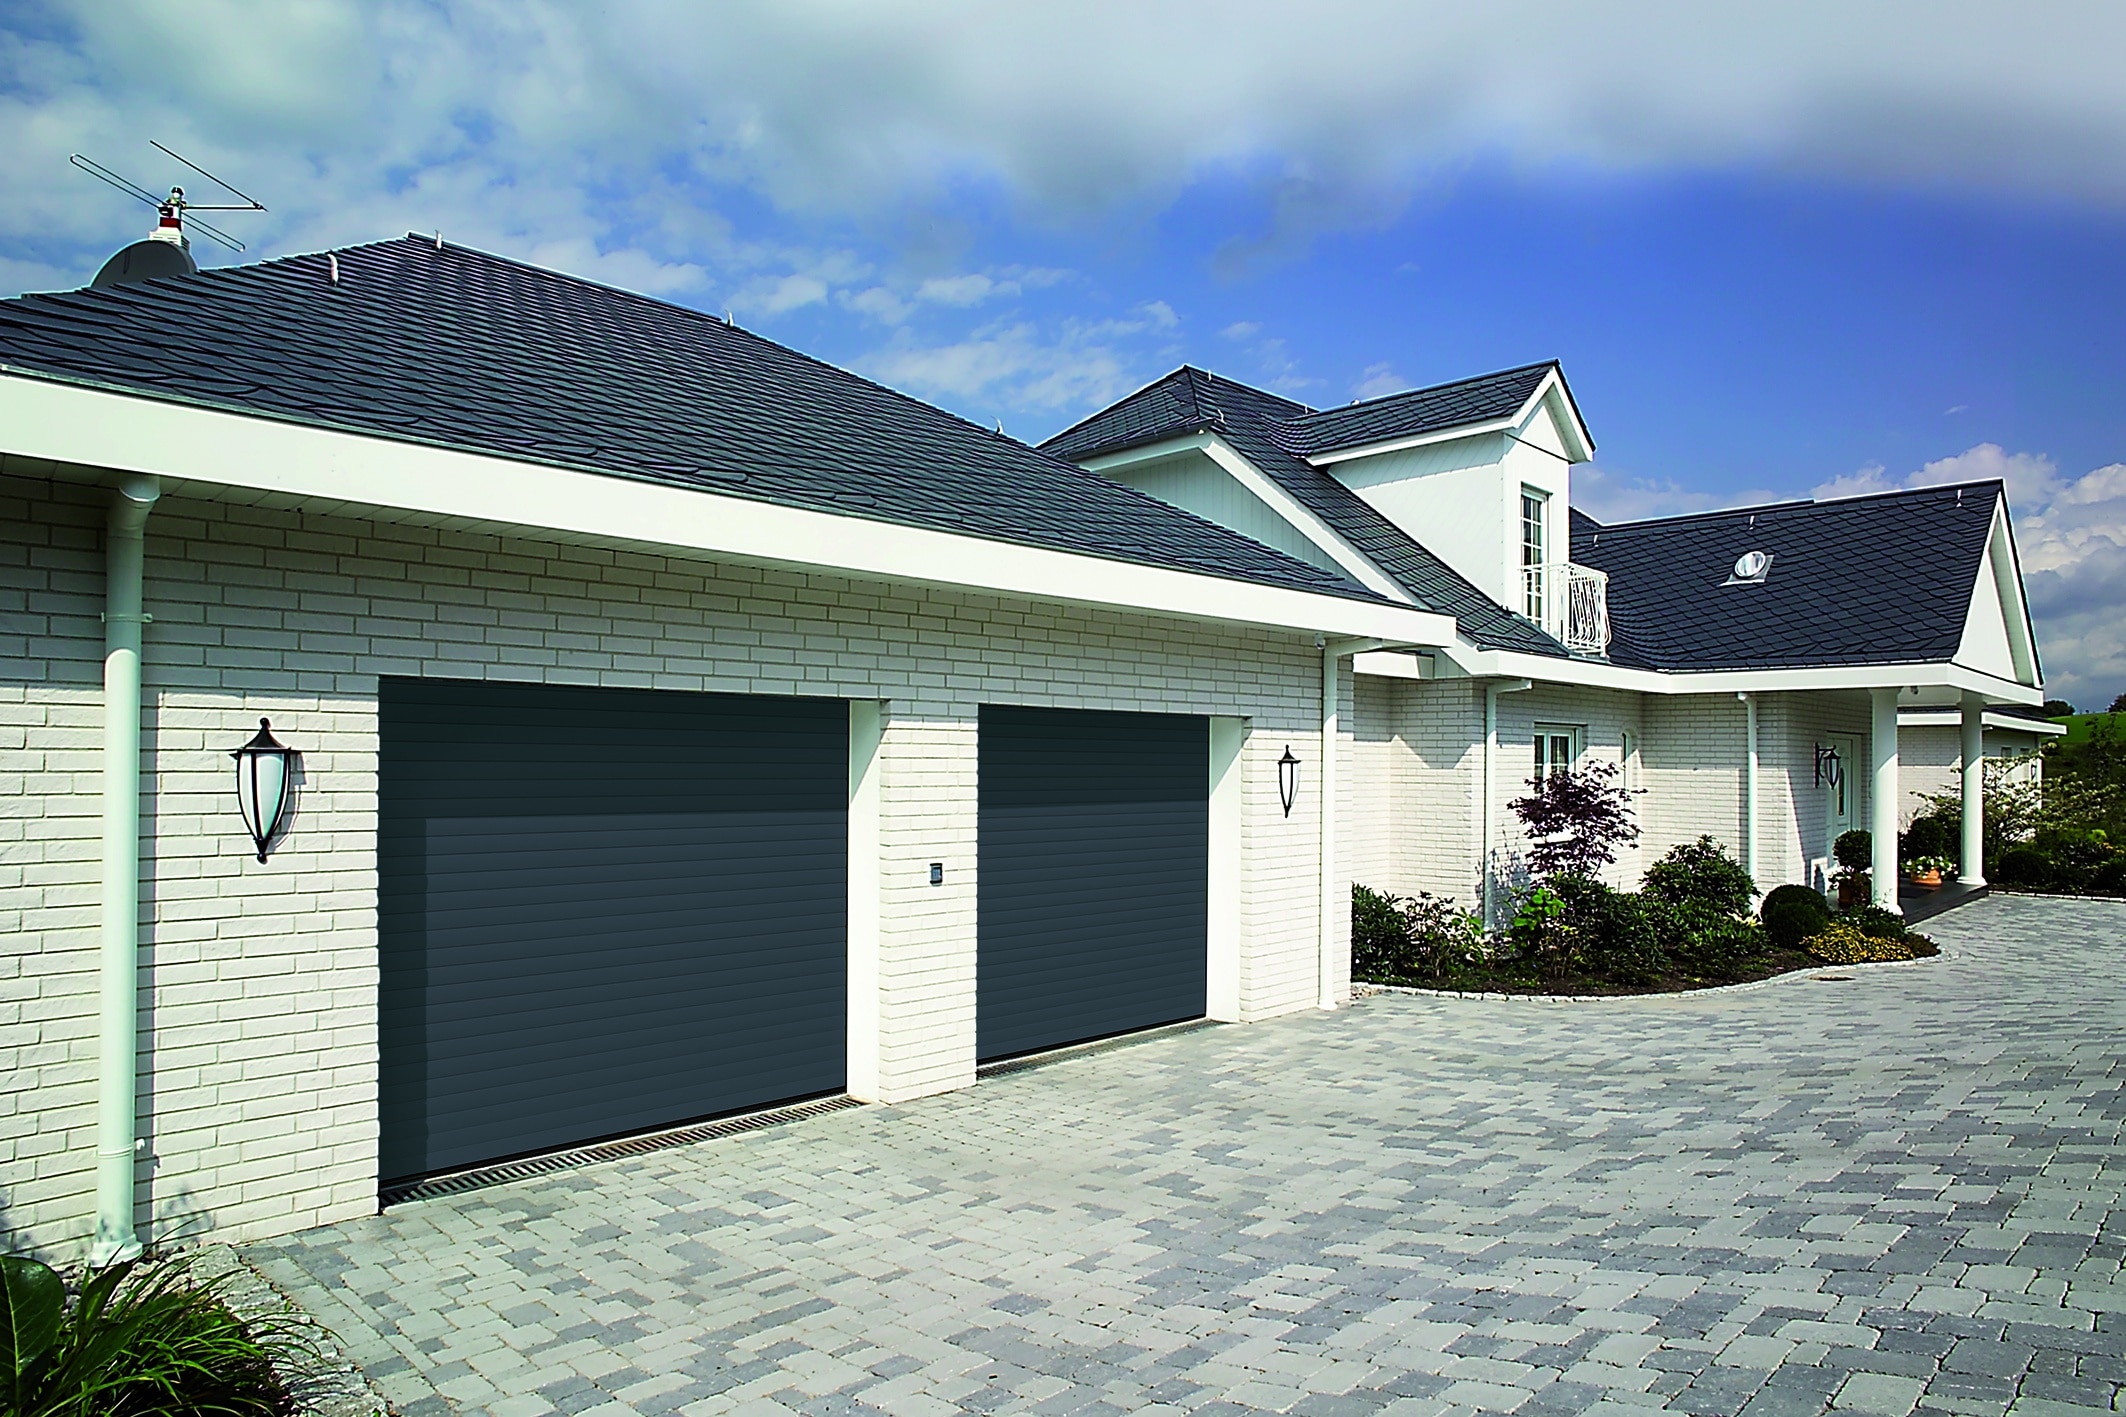 House with double garage with two garage doors